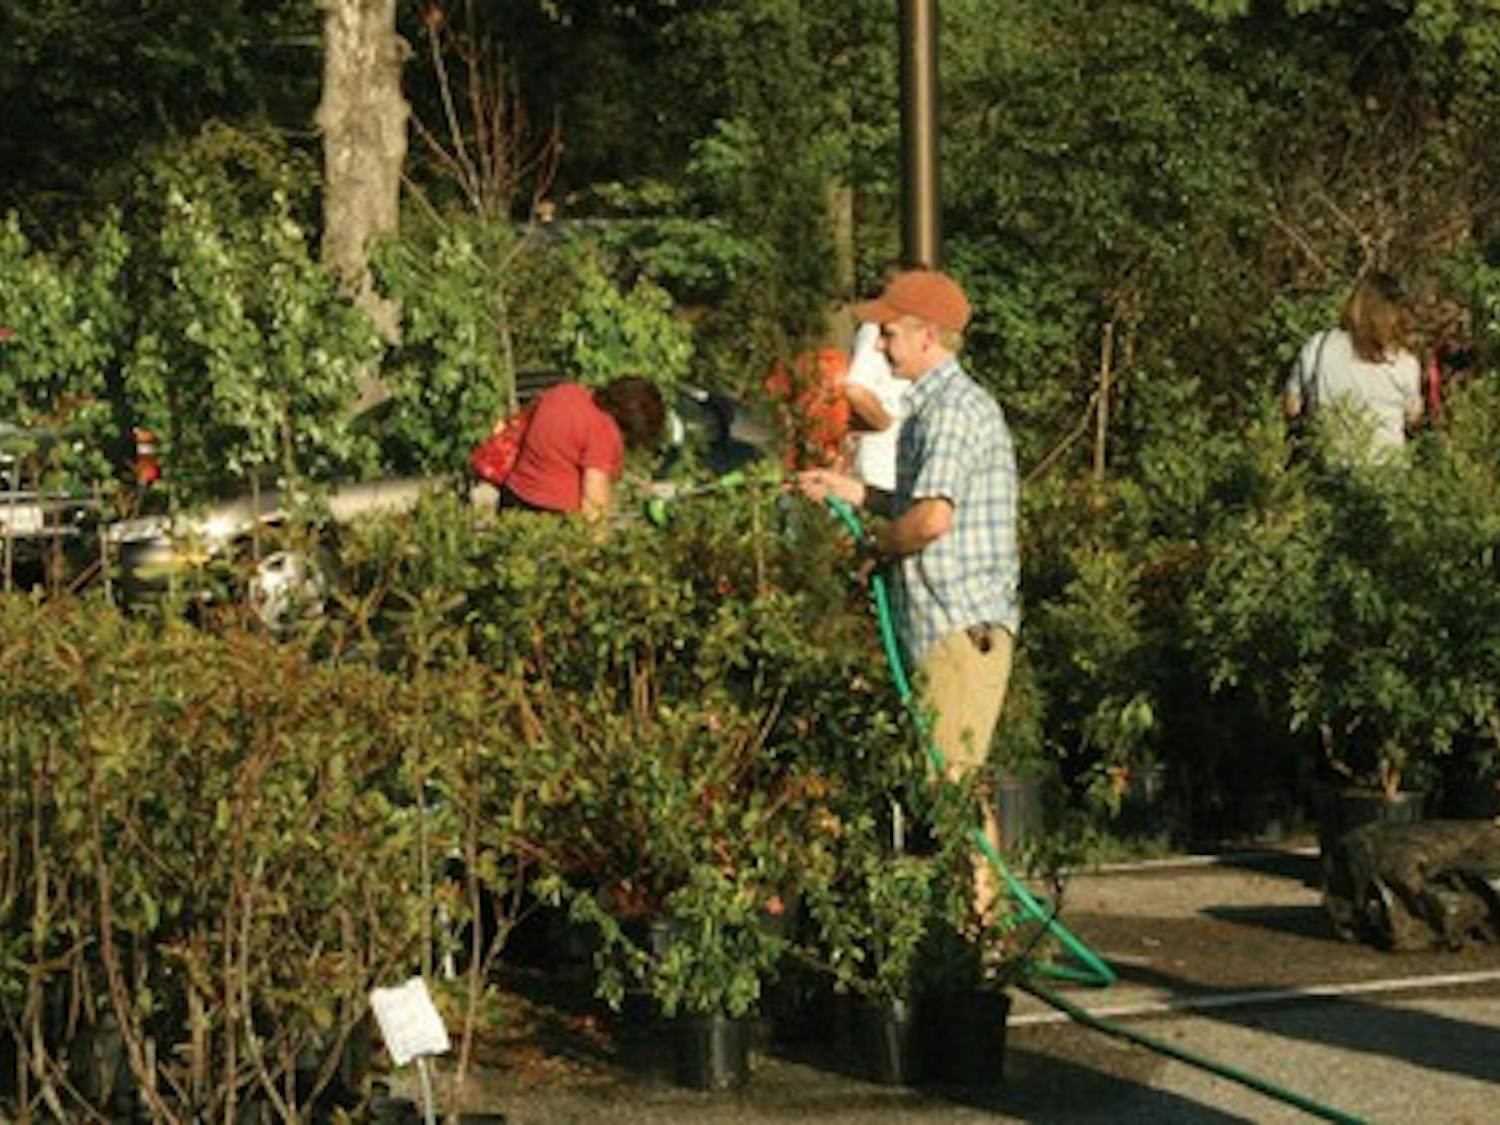 The plant sale featured a variety of vegetation for customers to purchase. Bedding plants, shrubs, trees, roses, and blueberry and blackberry plants were among the choices, and many were grown locally and around the Southeast. This year marked the ninth annual A-Day plant sale.